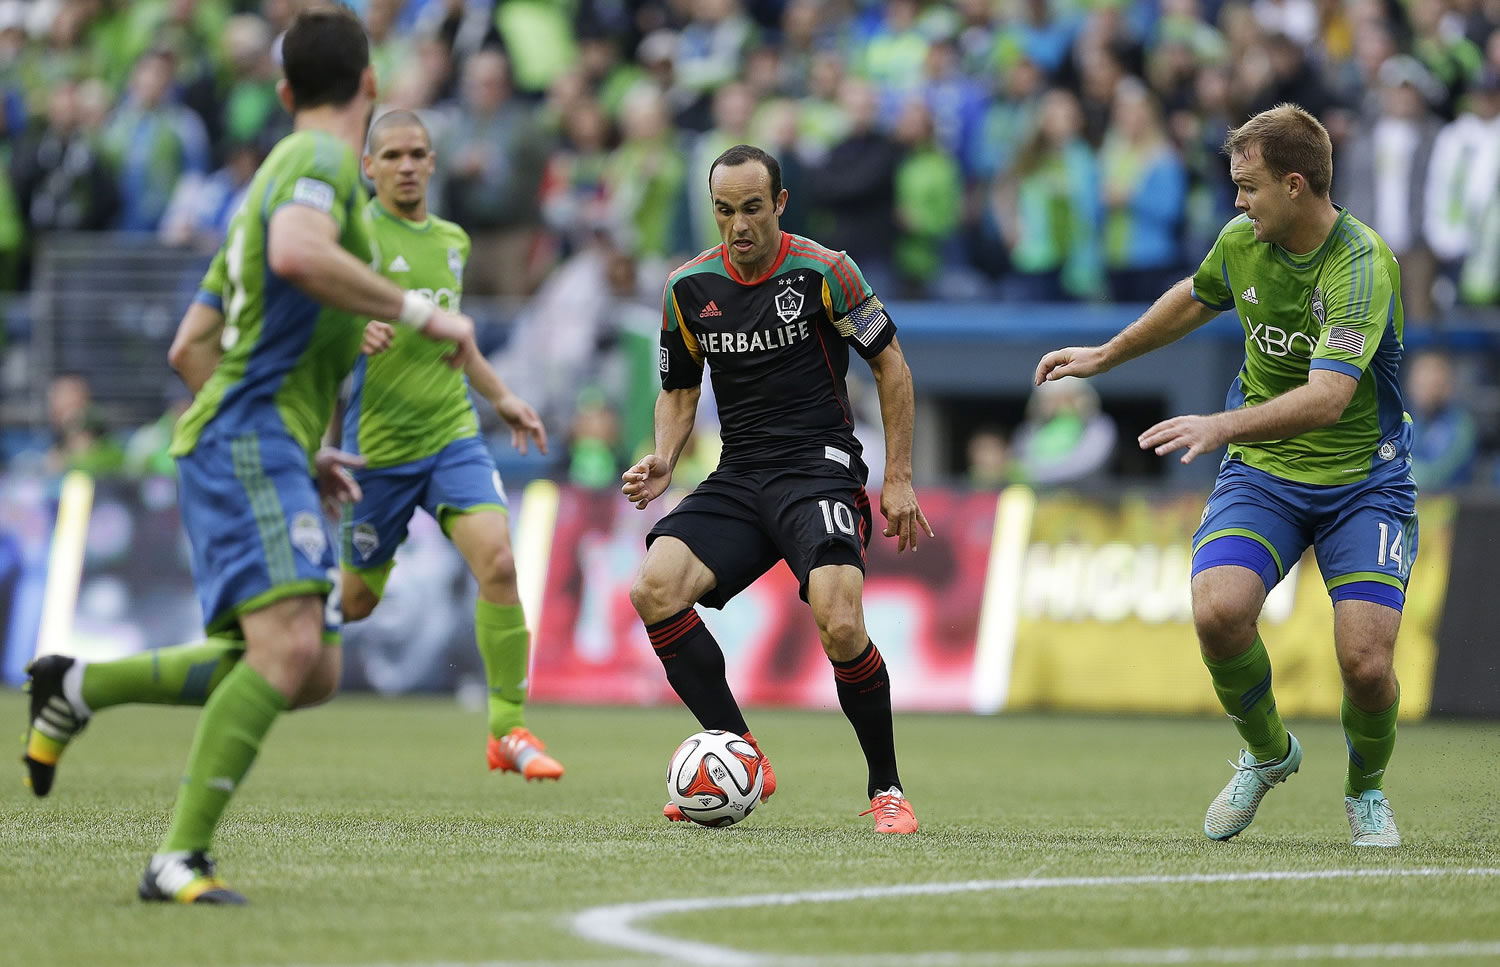 Los Angeles Galaxy midfielder Landon Donovan, center, dribbles the ball as Seattle Sounders' Chad Marshall, right, closes in during the first half Saturday, Oct. 25, 2014, in Seattle. (AP Photo/Ted S.